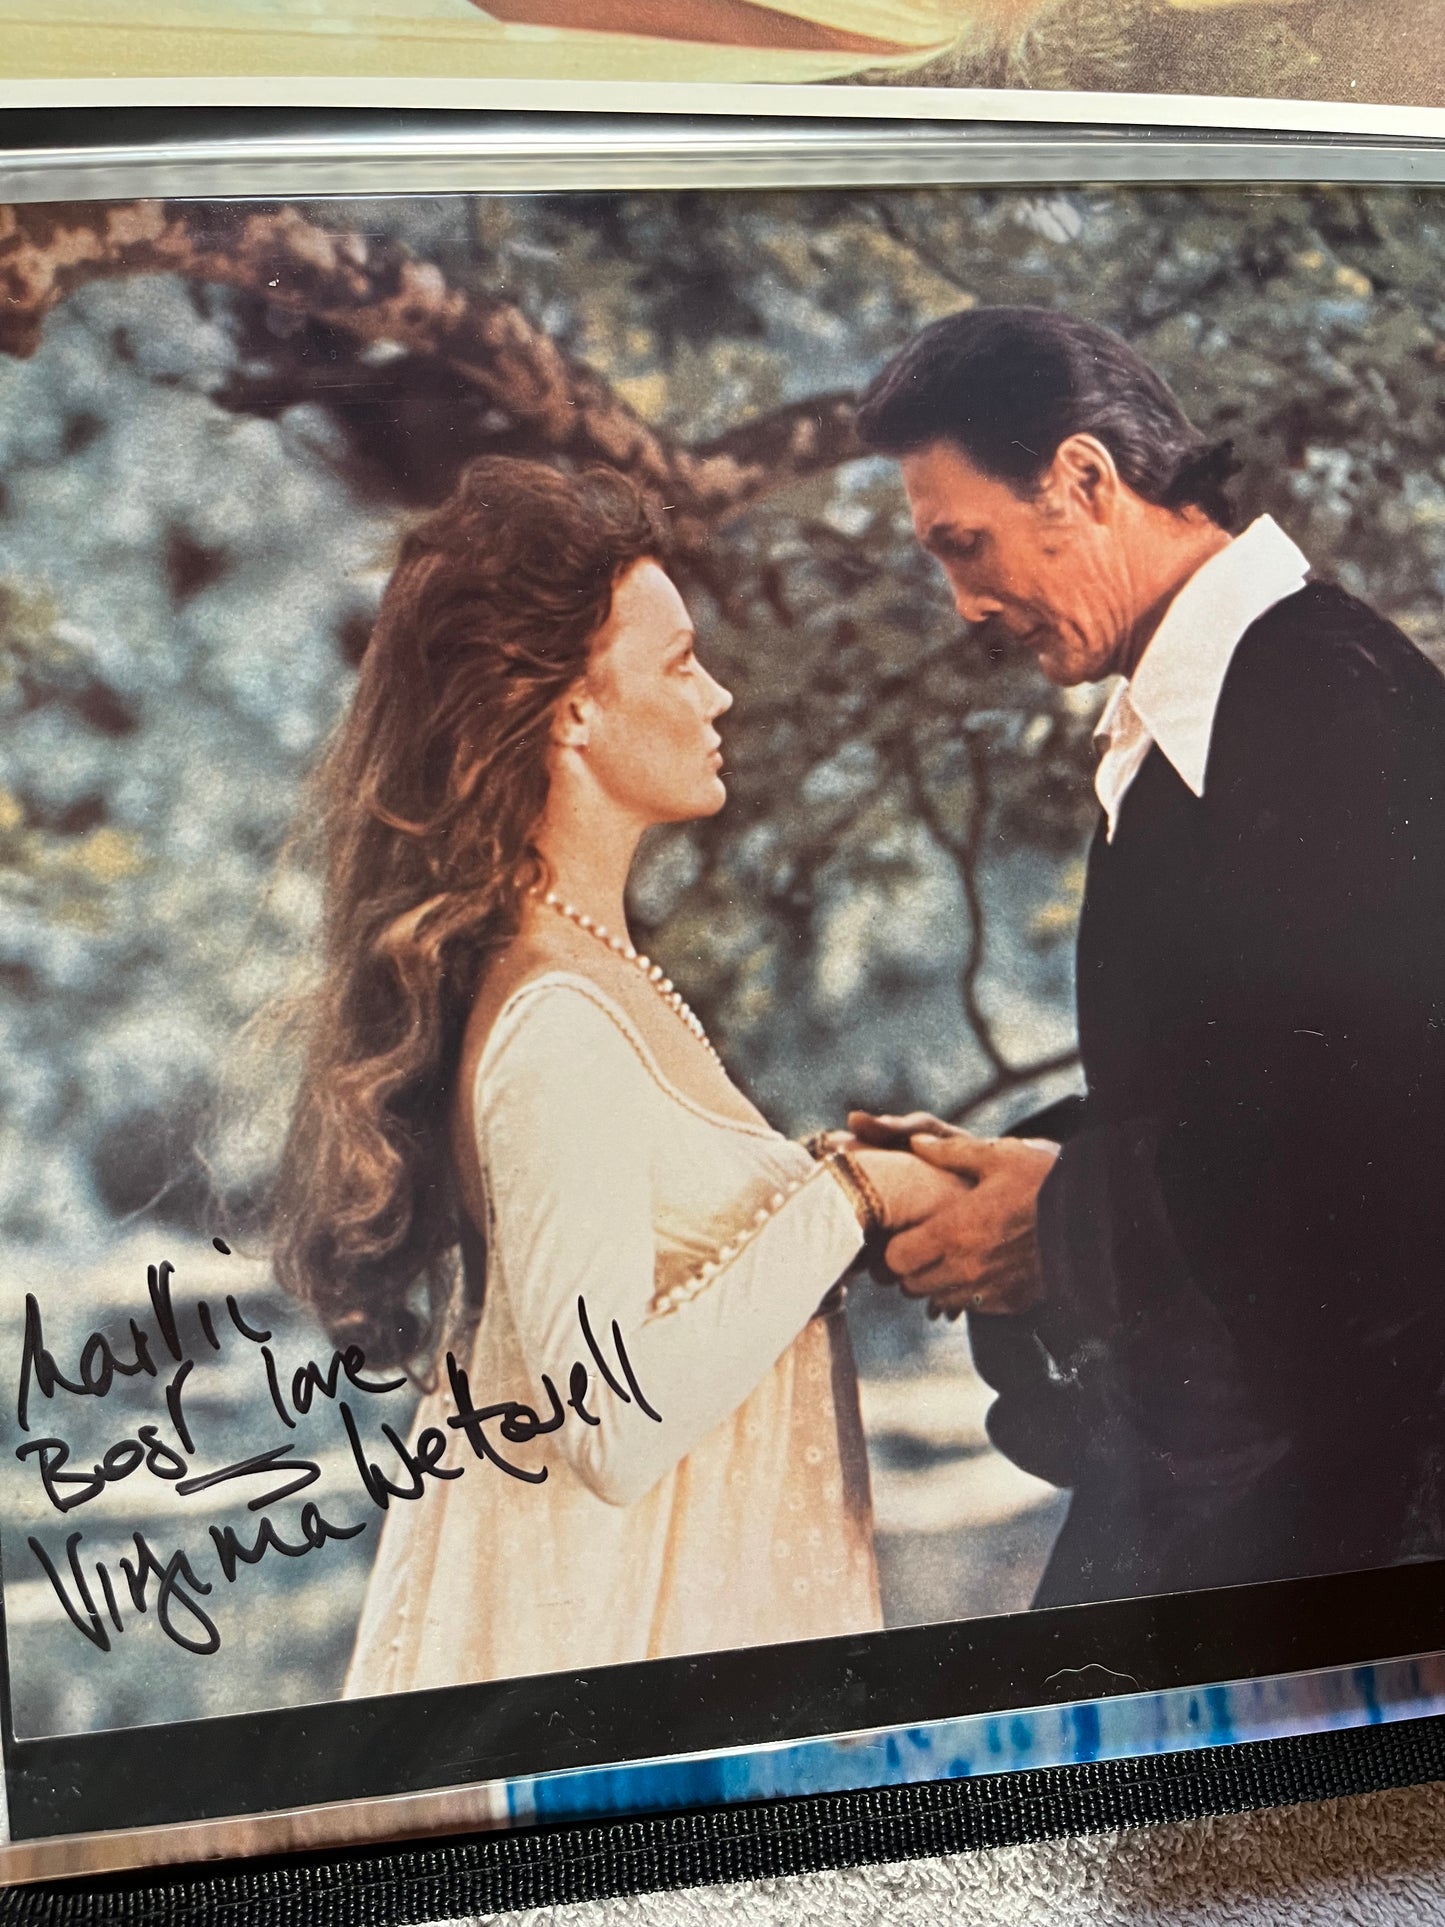 Virginia Wetherell from A CLOCKWORK ORANGE and DRACULA (autograph)